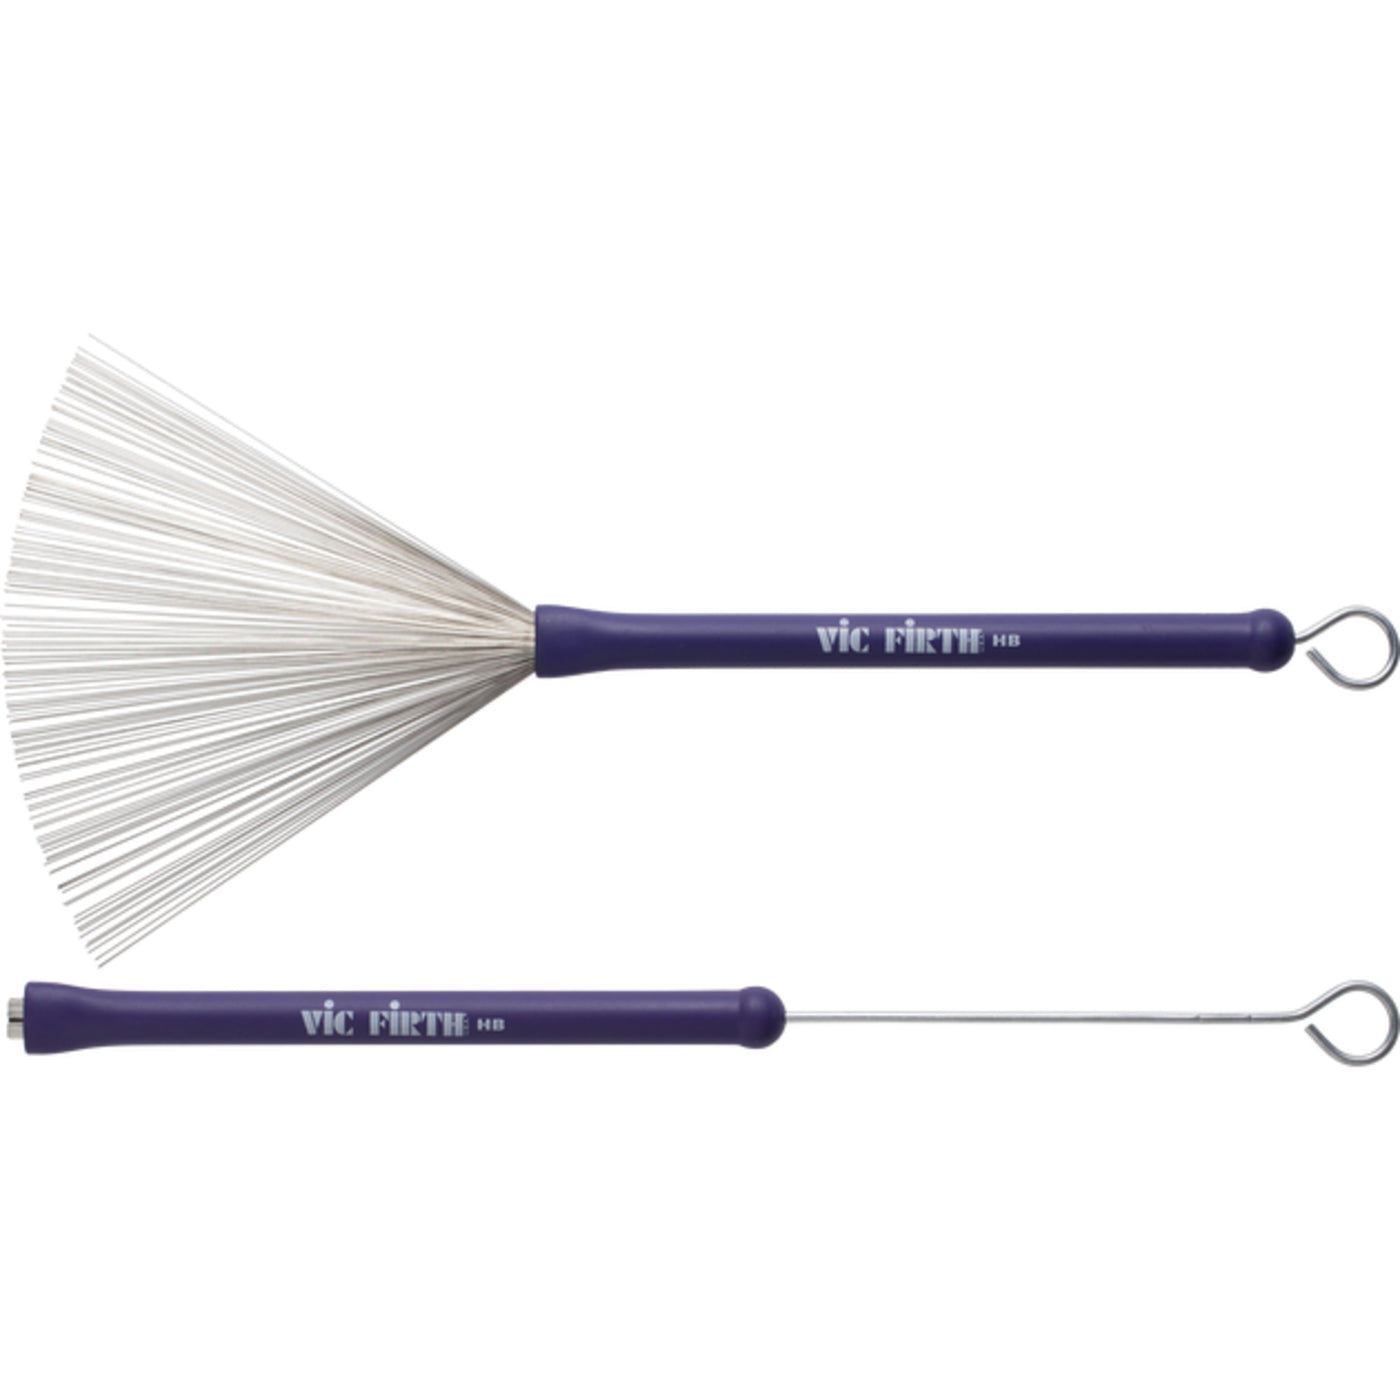 Vic Firth Heritage Brush – Rubber Handle Brush (HB)